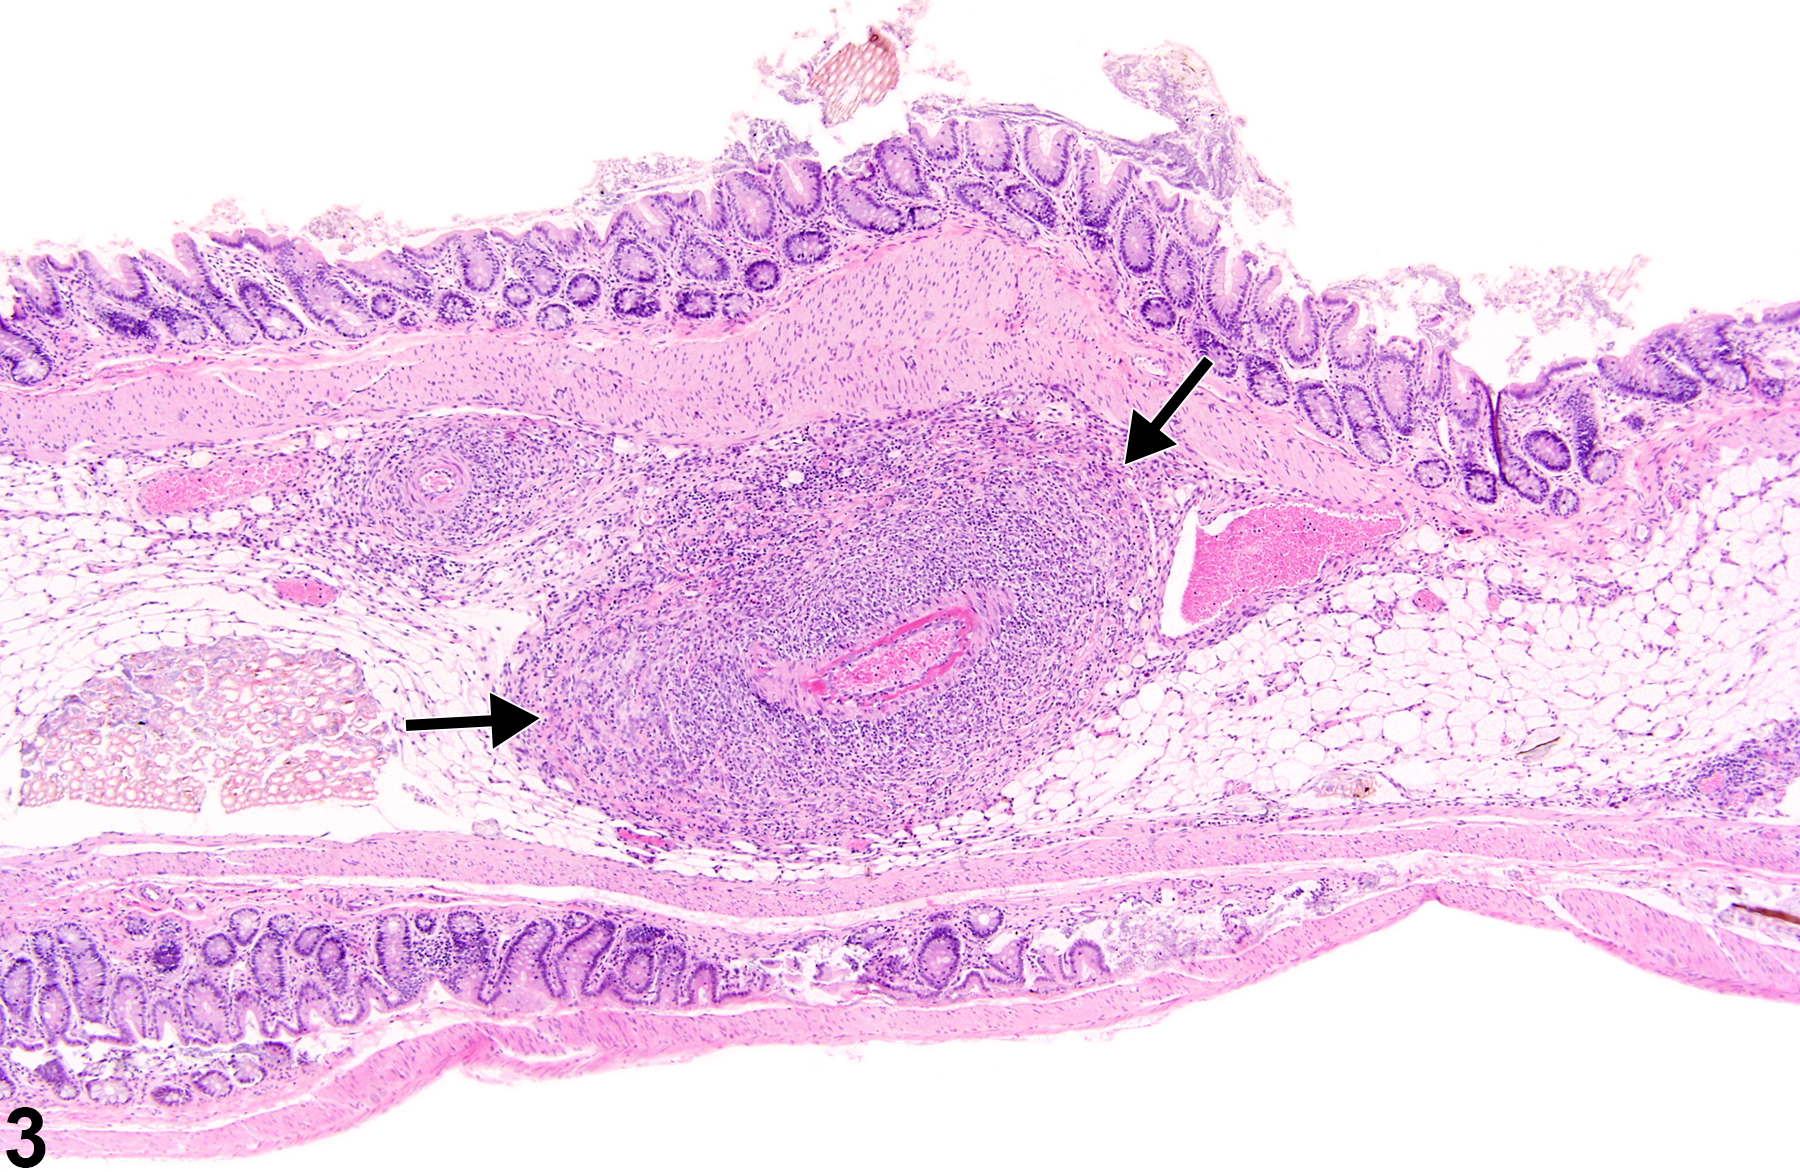 Image of polyarteritis nodosa in the stomach, glandular stomach from a male B6C3F1/N mouse in a chronic study